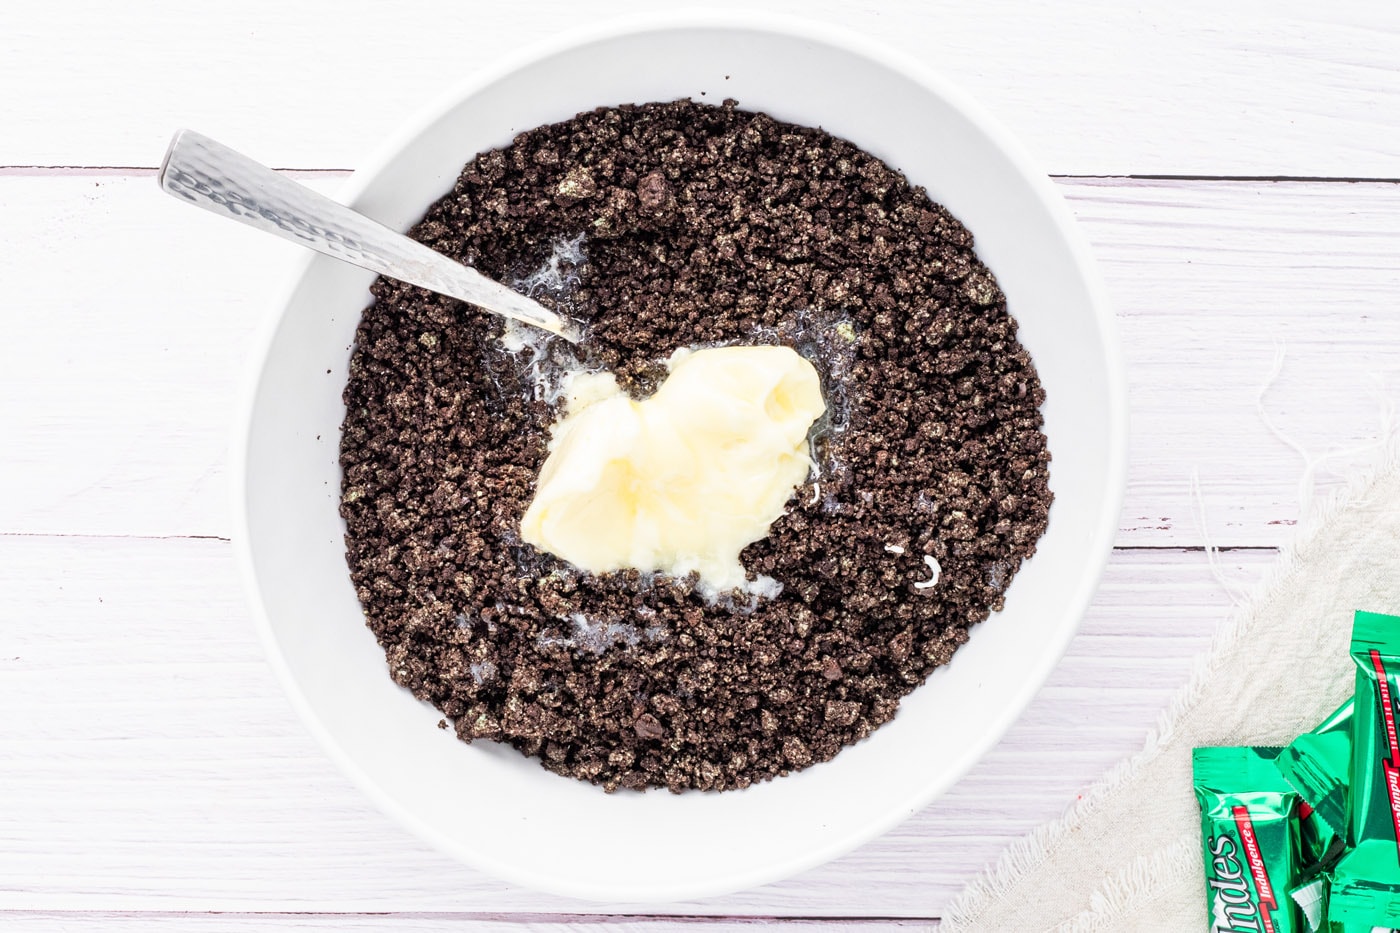 Oreo cookie crumbs with melted butter